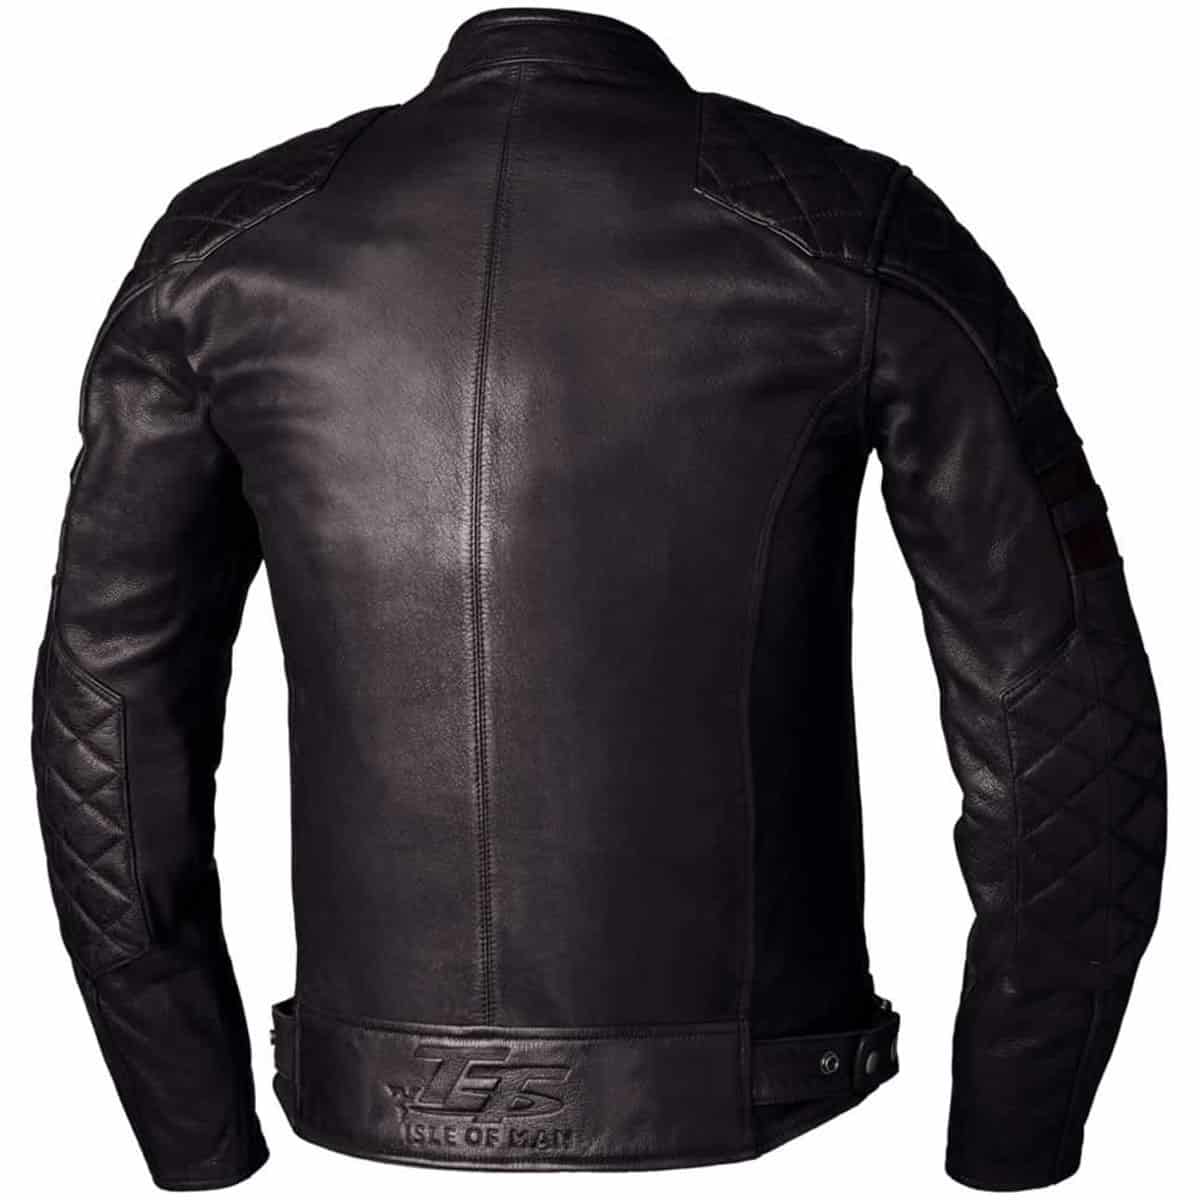 RST Hillberry 2 leather jacket back